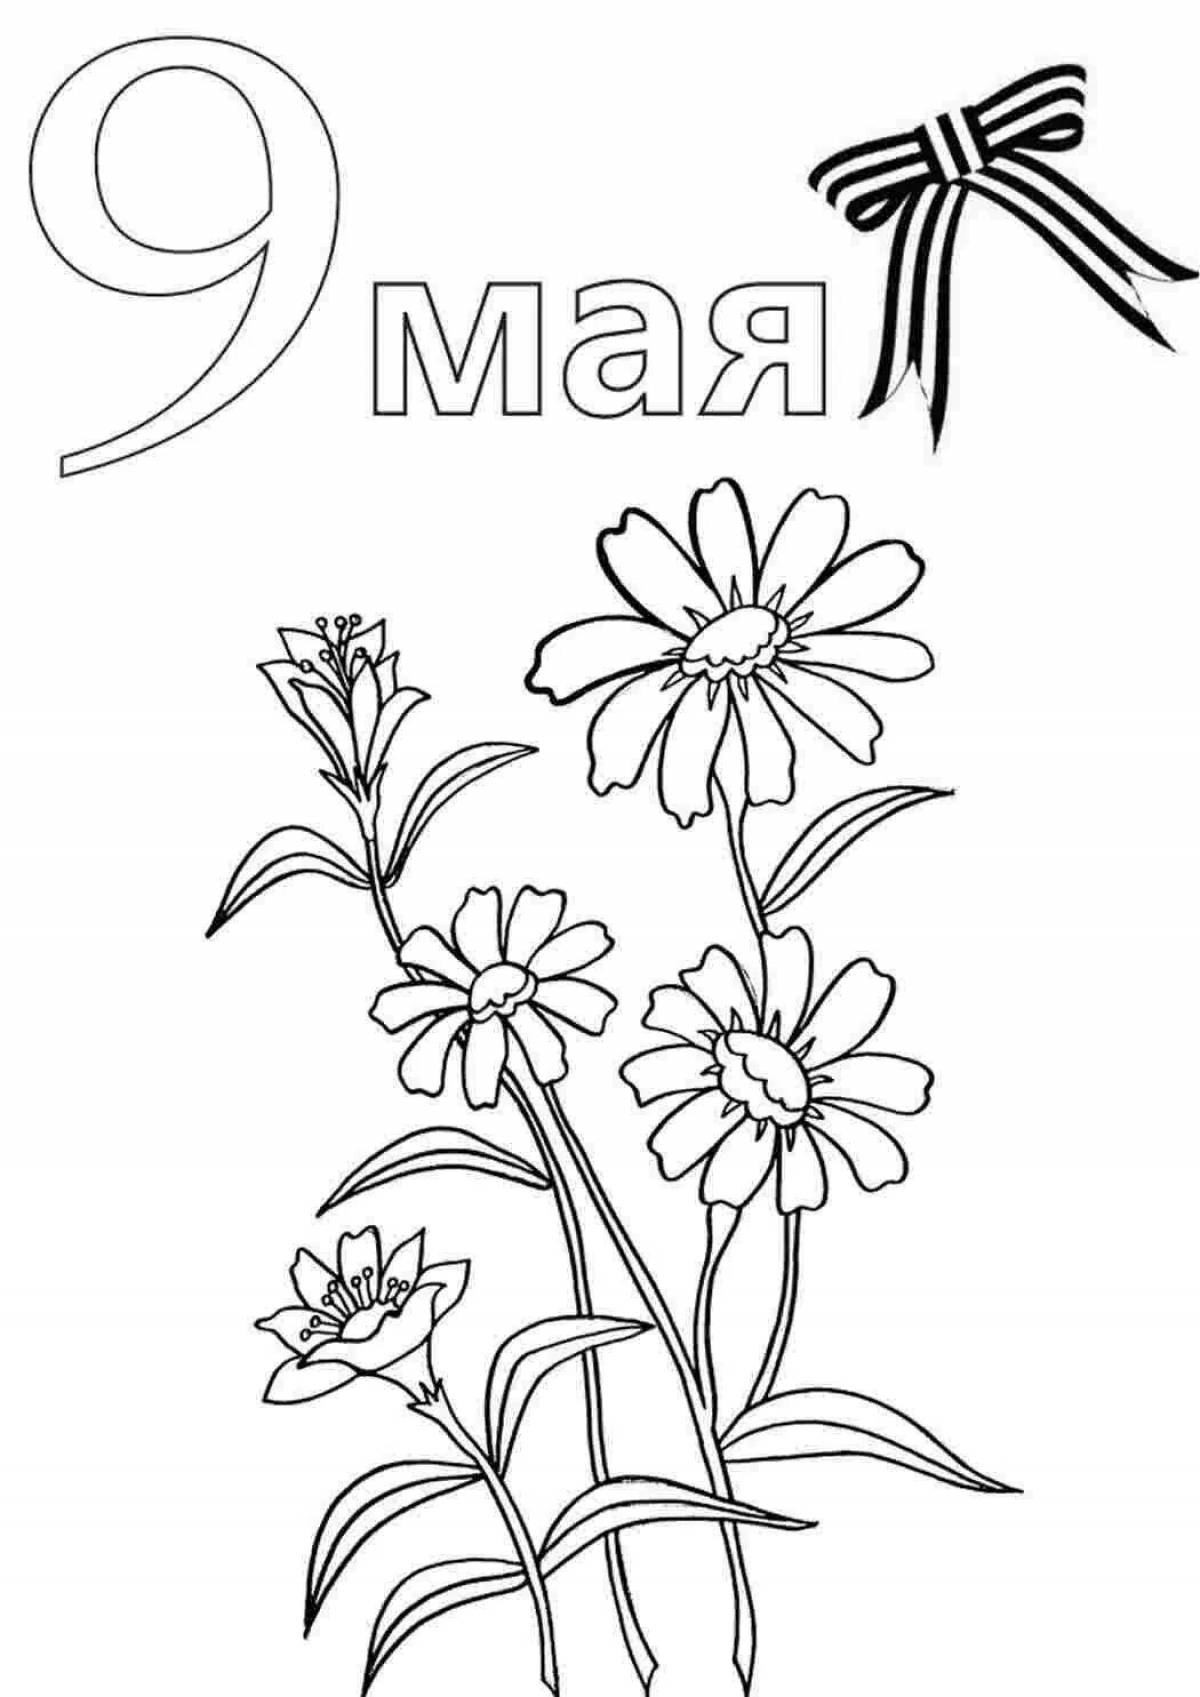 Awesome May 9th carnation coloring pages